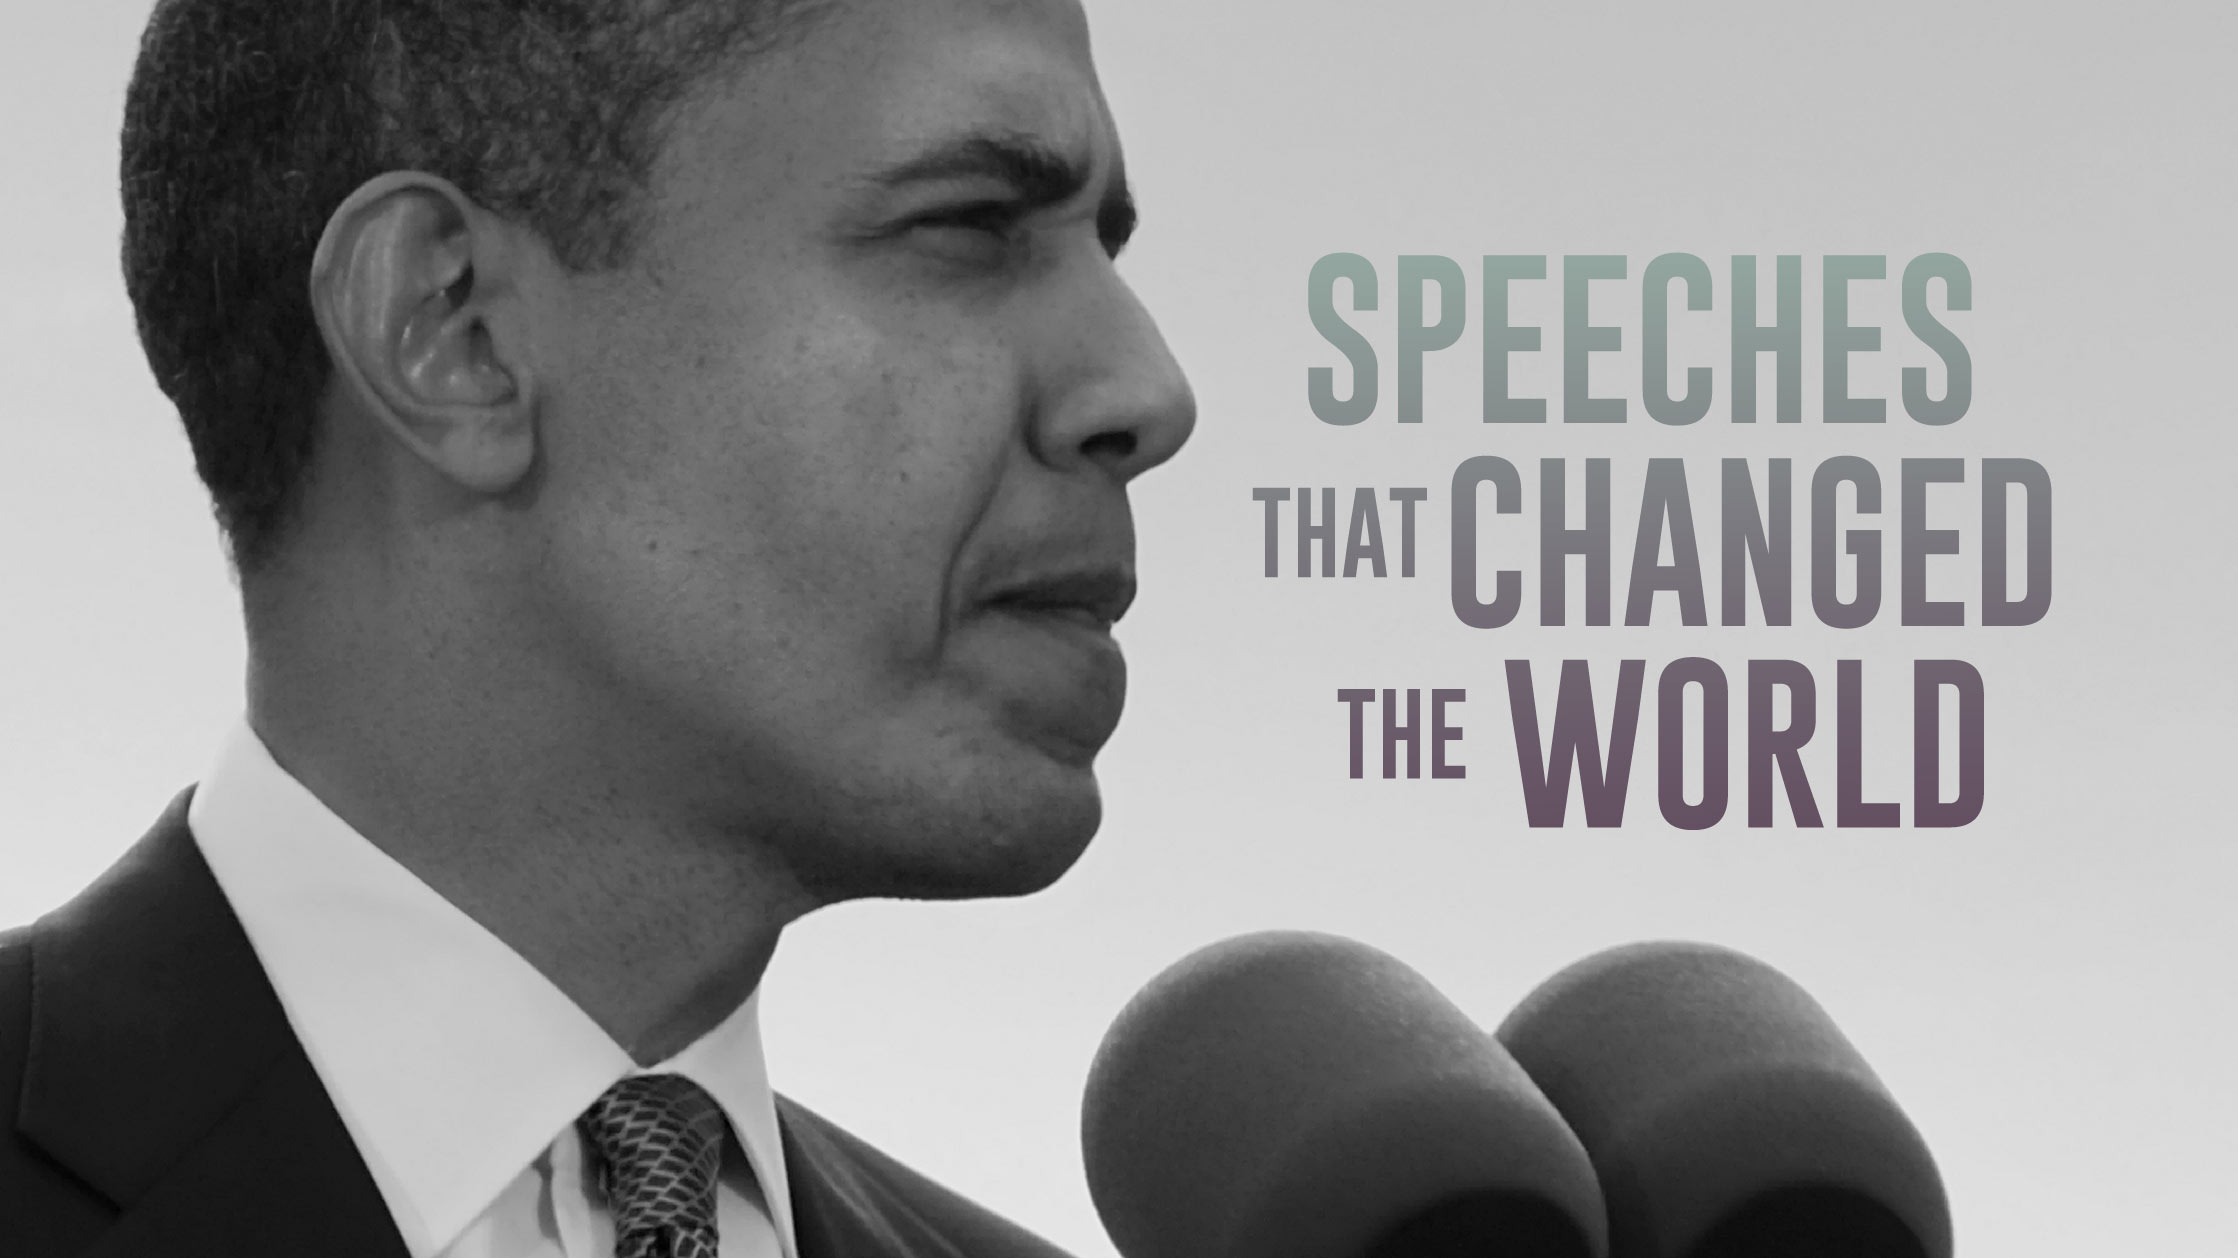 what are speeches that changed the world